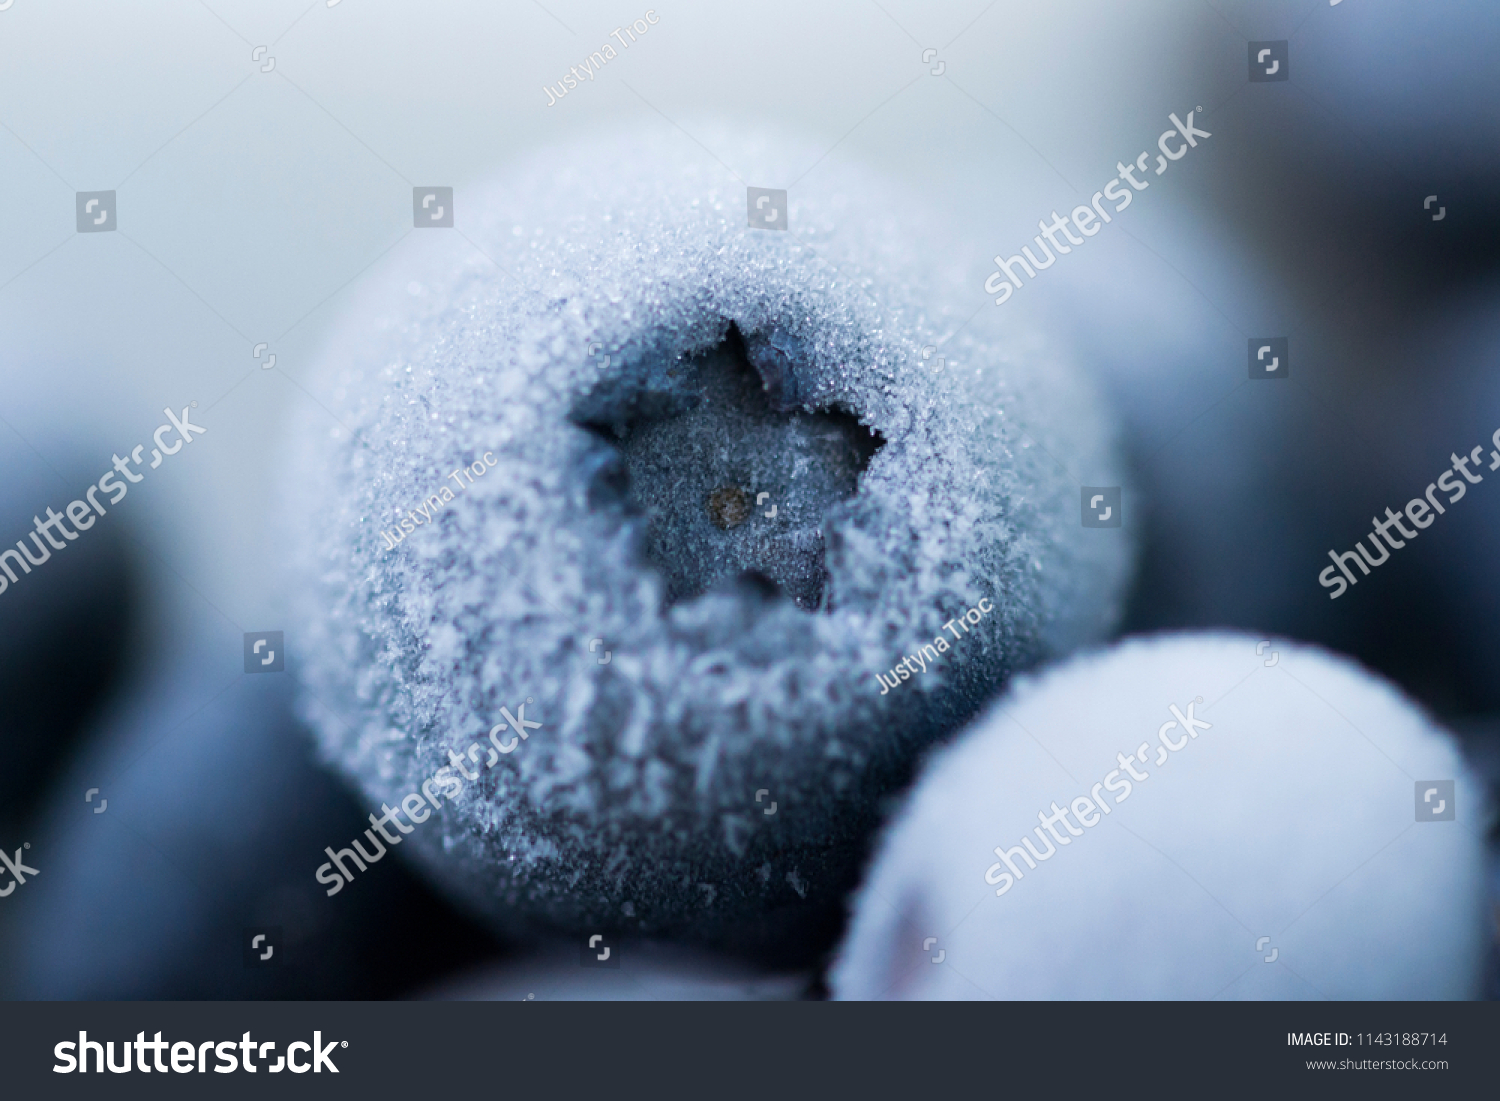 Frozen blueberries close up picture.  #1143188714